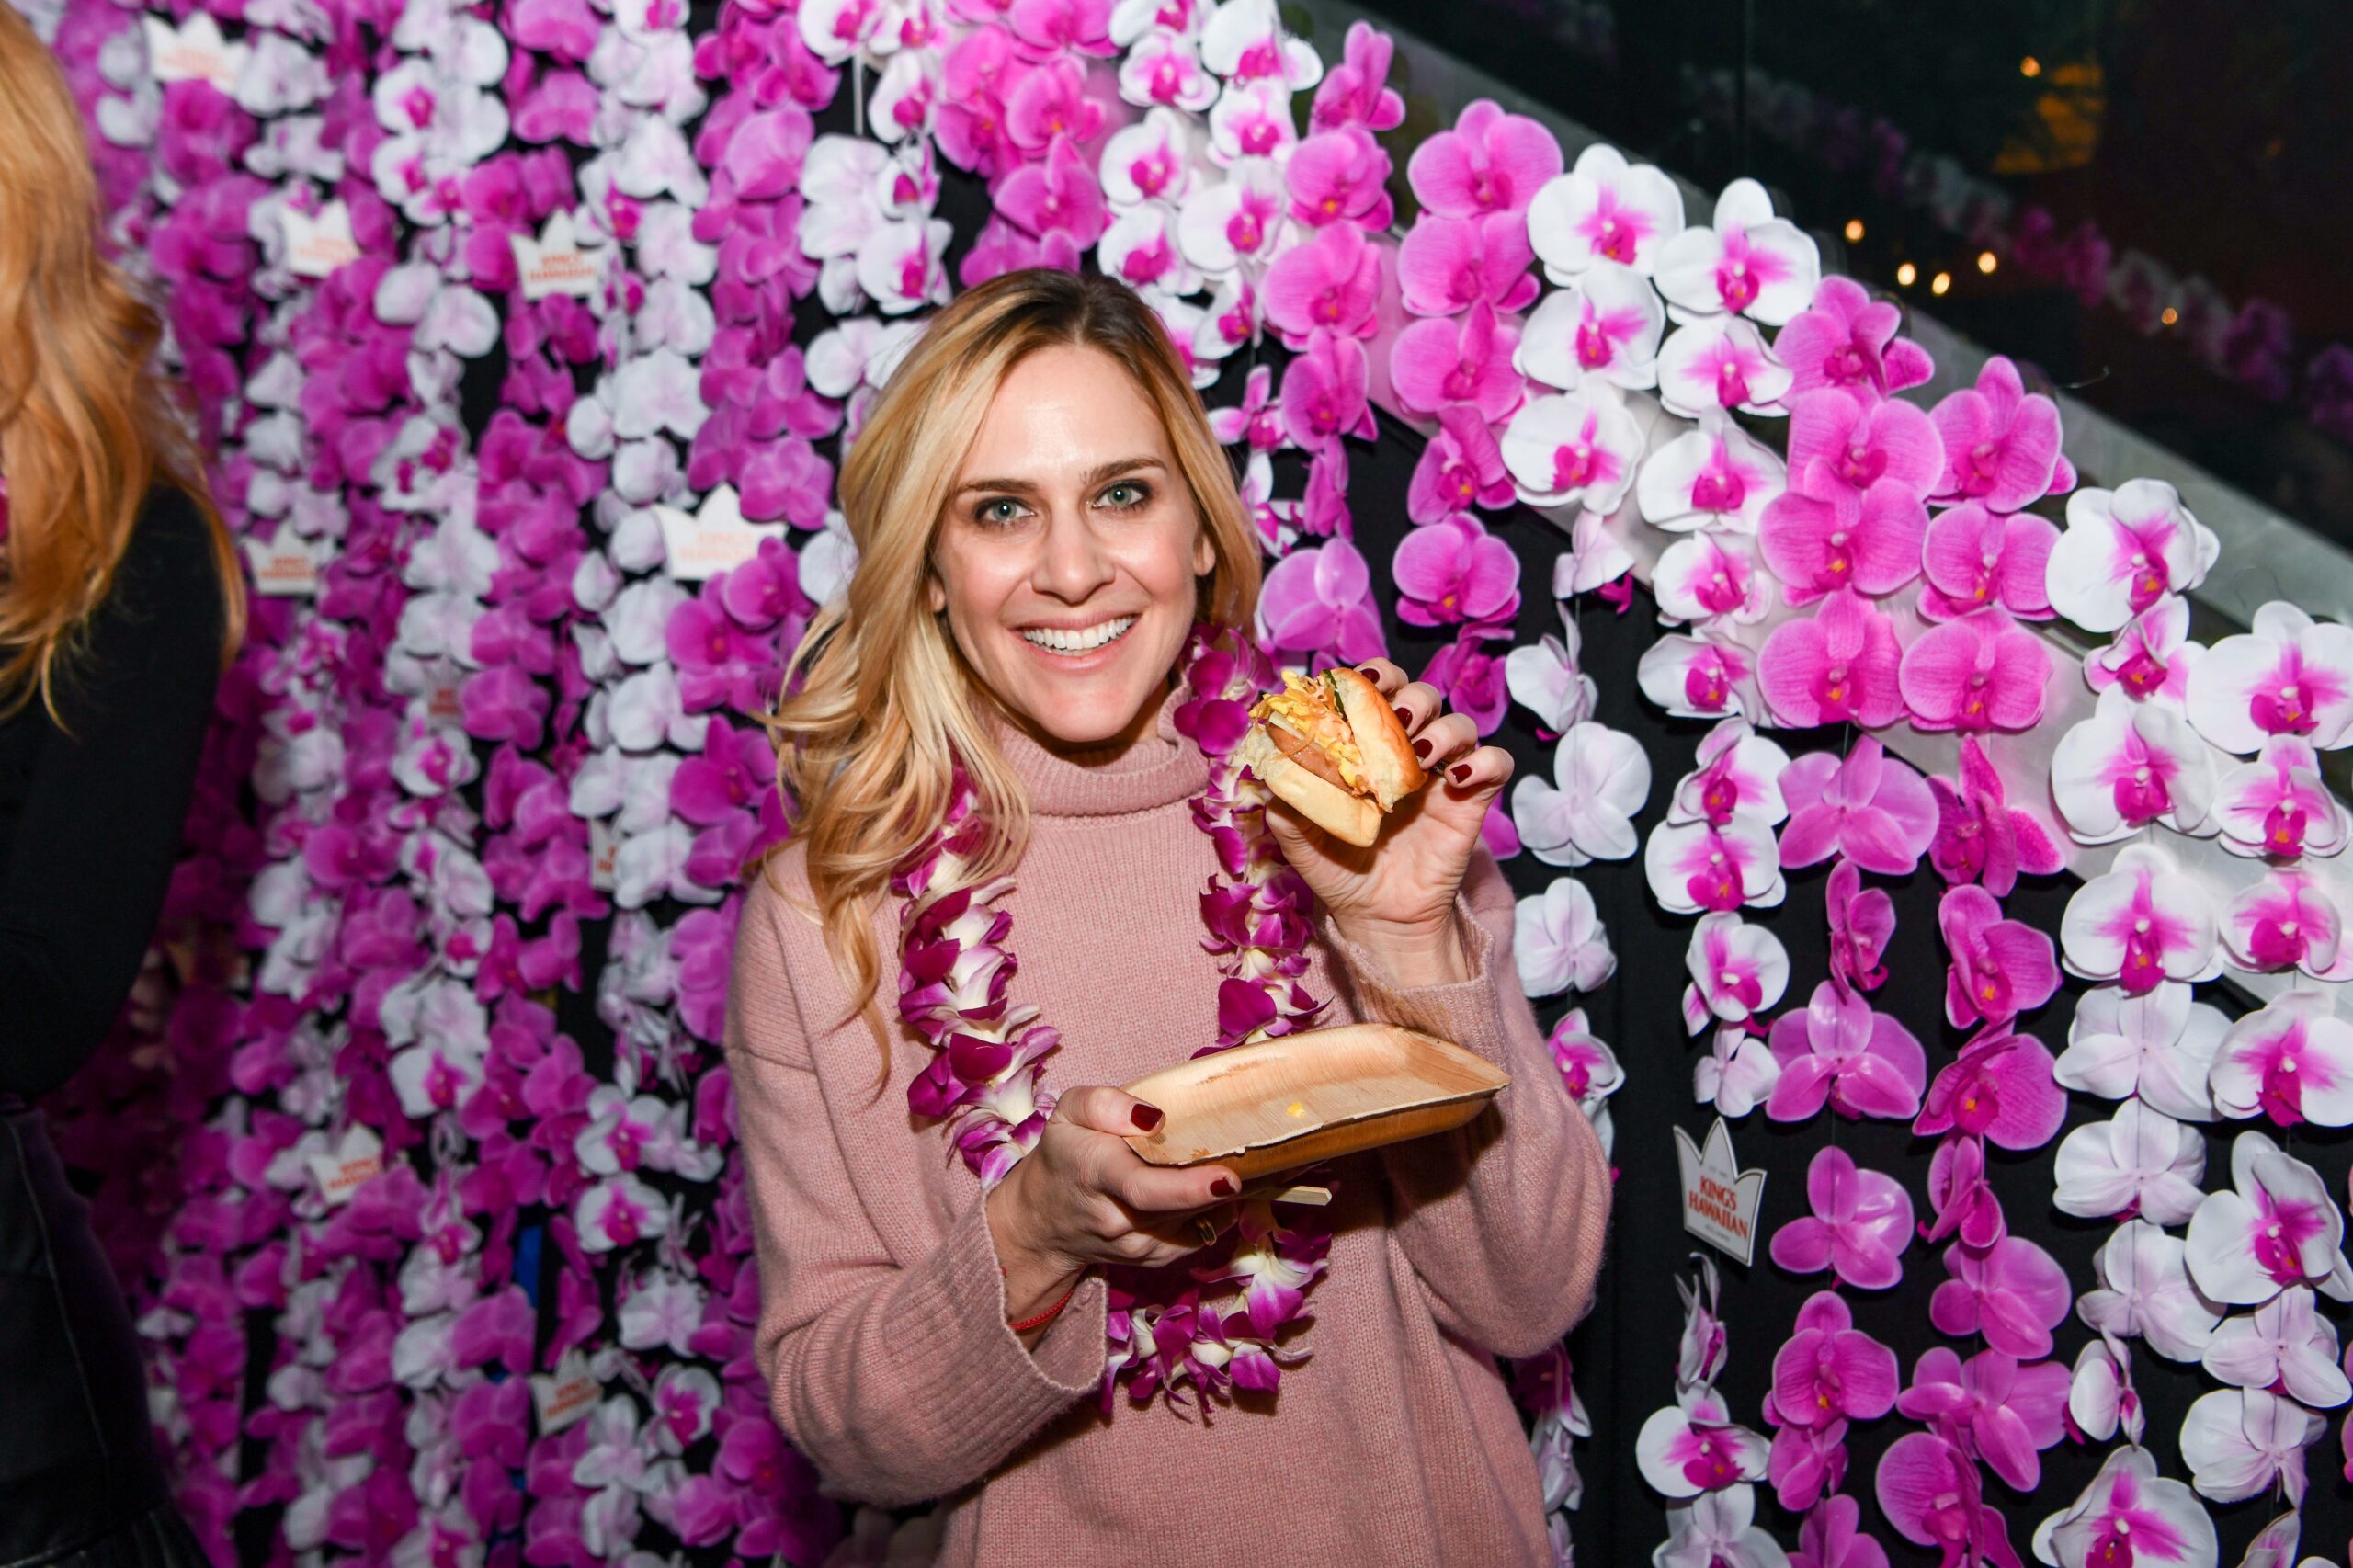 A guest posing in front of a wall of leis with a breakfast sandwich.